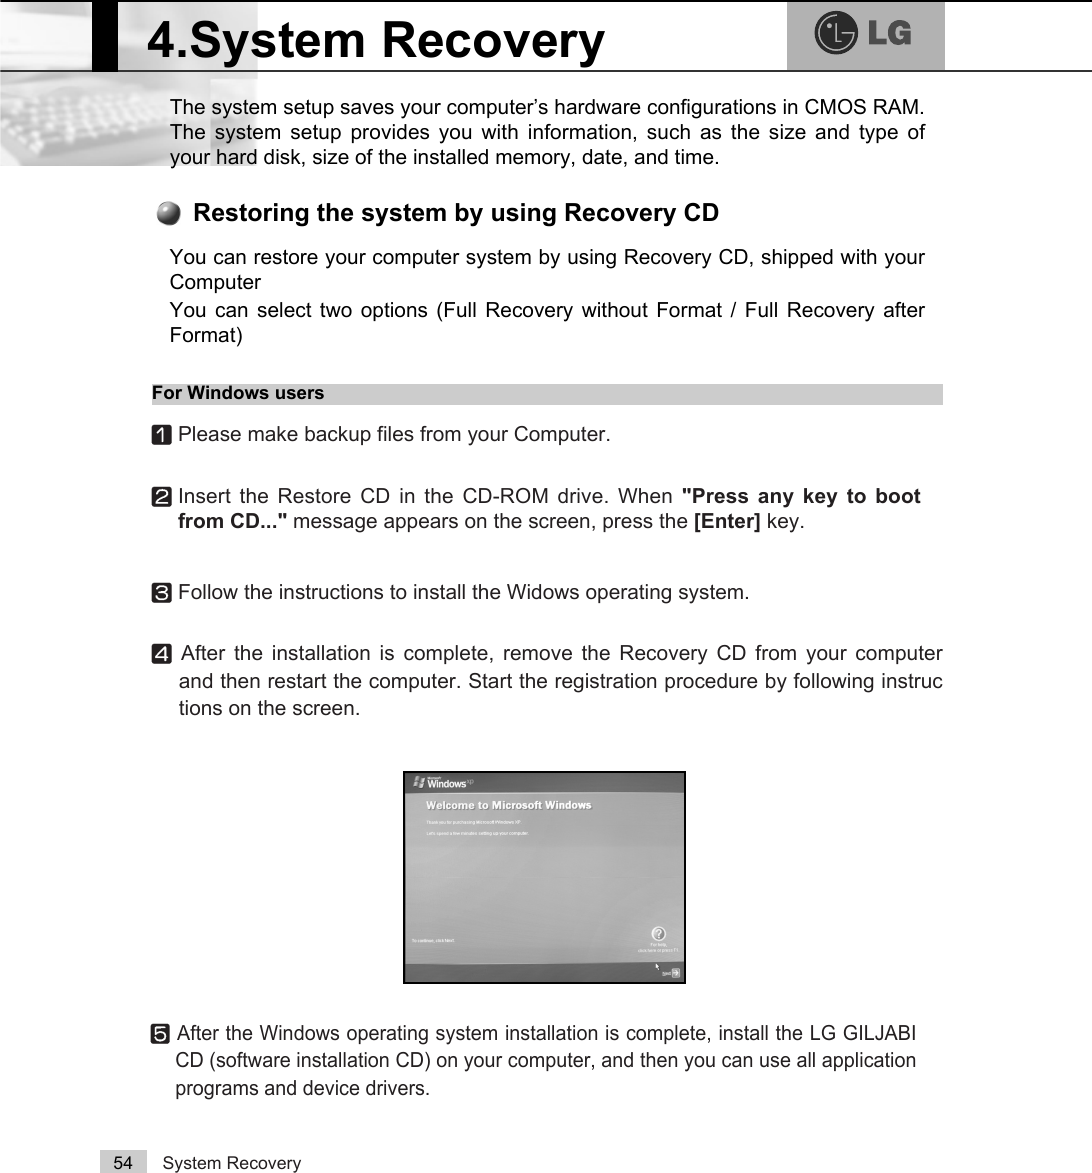 System Recovery54The system setup saves your computer’s hardware configurations in CMOS RAM.The system setup provides you with information, such as the size and type ofyour hard disk, size of the installed memory, date, and time.4.System RecoveryⓢAfter the Windows operating system installation is complete, install the LG GILJABICD (software installation CD) on your computer, and then you can use all applicationprograms and device drivers. You can restore your computer system by using Recovery CD, shipped with yourComputerYou can select two options (Full Recovery without Format / Full Recovery afterFormat) Restoring the system by using Recovery CDFor Windows usersⓞPlease make backup files from your Computer.ⓟInsert the Restore CD in the CD-ROM drive. When &quot;Press any key to bootfrom CD...&quot; message appears on the screen, press the [Enter] key. ⓠFollow the instructions to install the Widows operating system.ⓡAfter the installation is complete, remove the Recovery CD from your computerand then restart the computer. Start the registration procedure by following instructions on the screen.